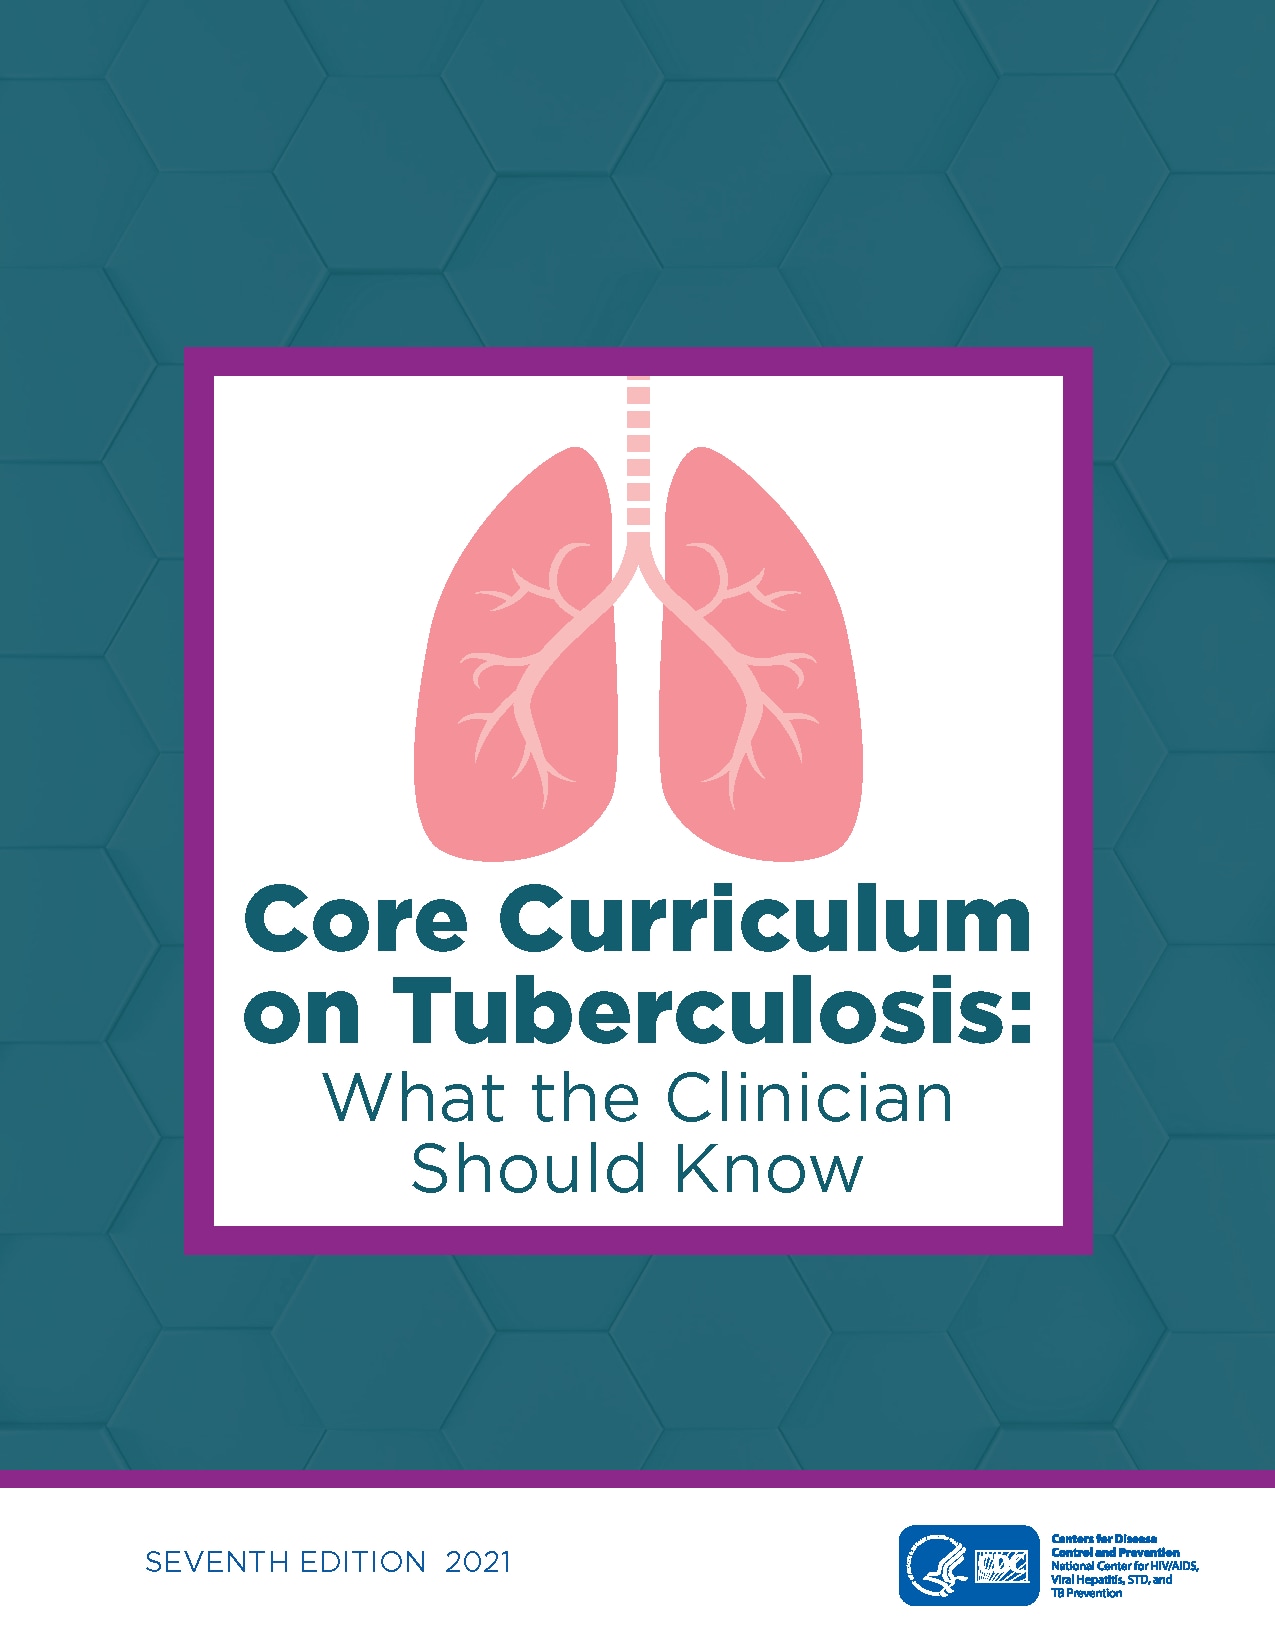 Pink lungs are in a white box on a green background with "Core Curriculum on Tuberculosis: What the Clinician Should Know"